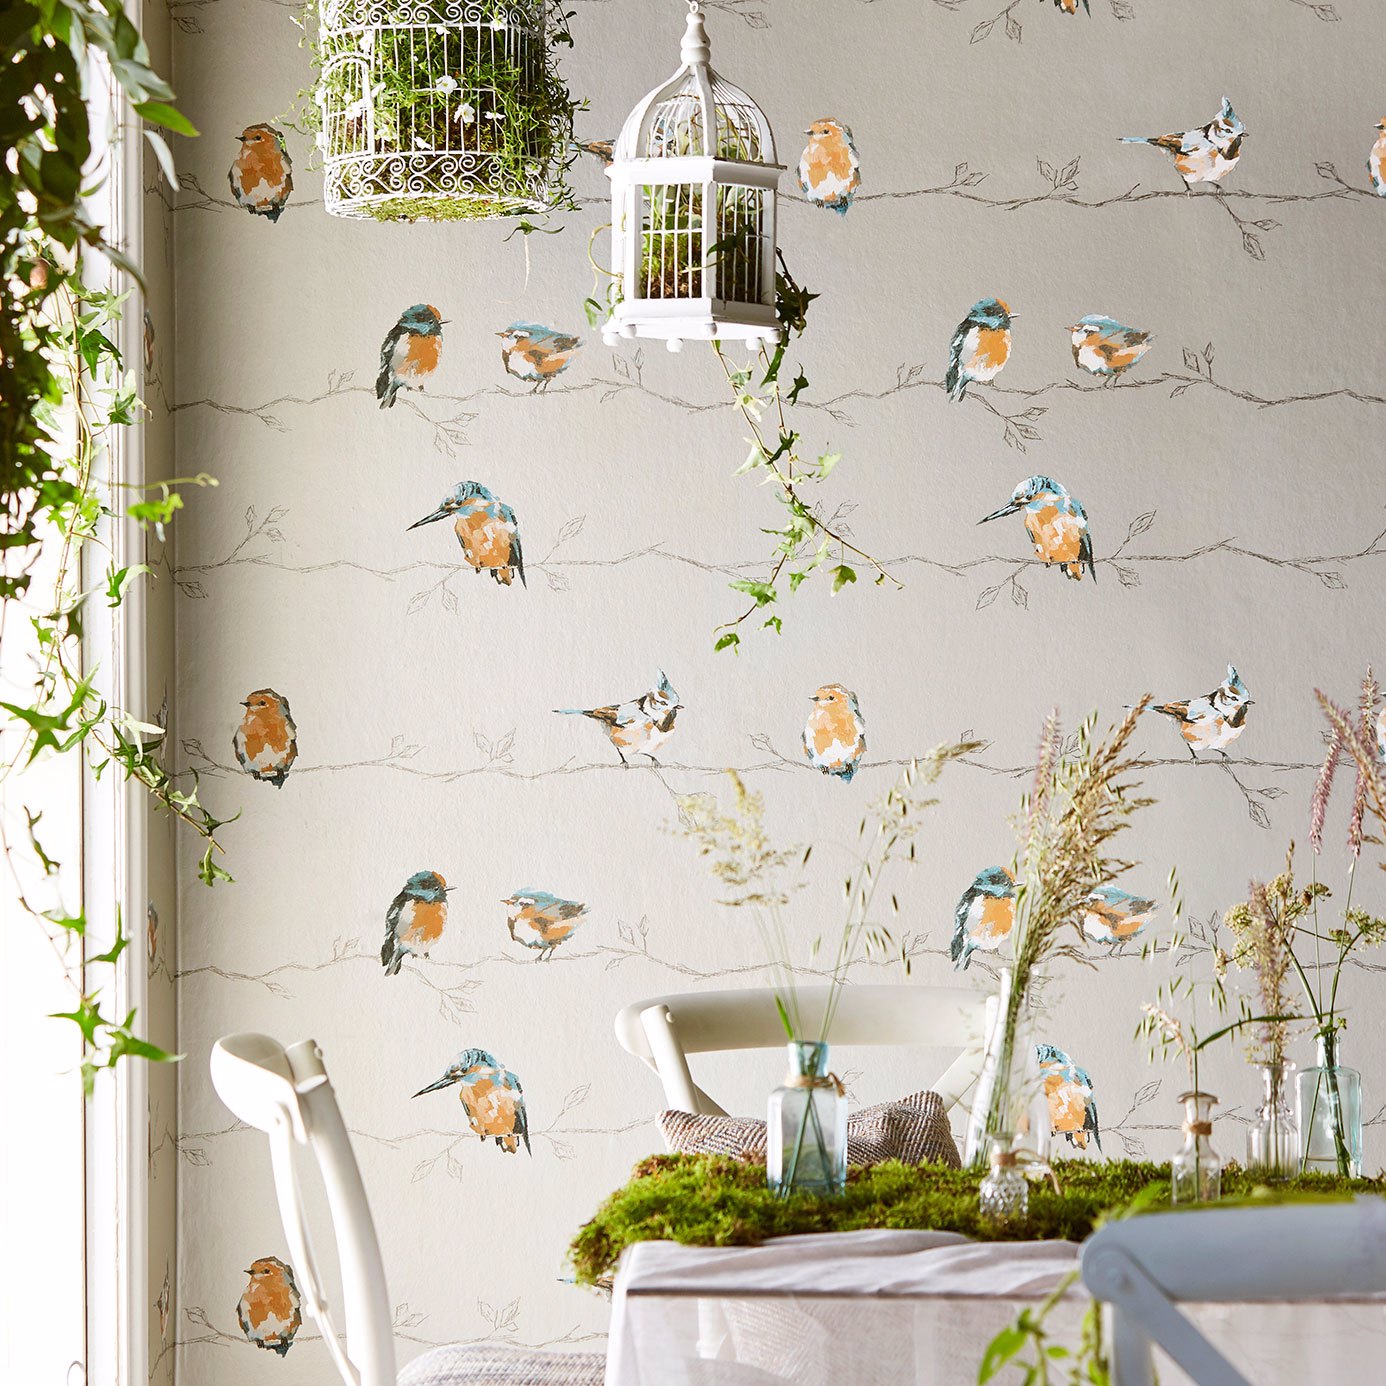 Persico Neutral/Chalk Wallpaper by HAR